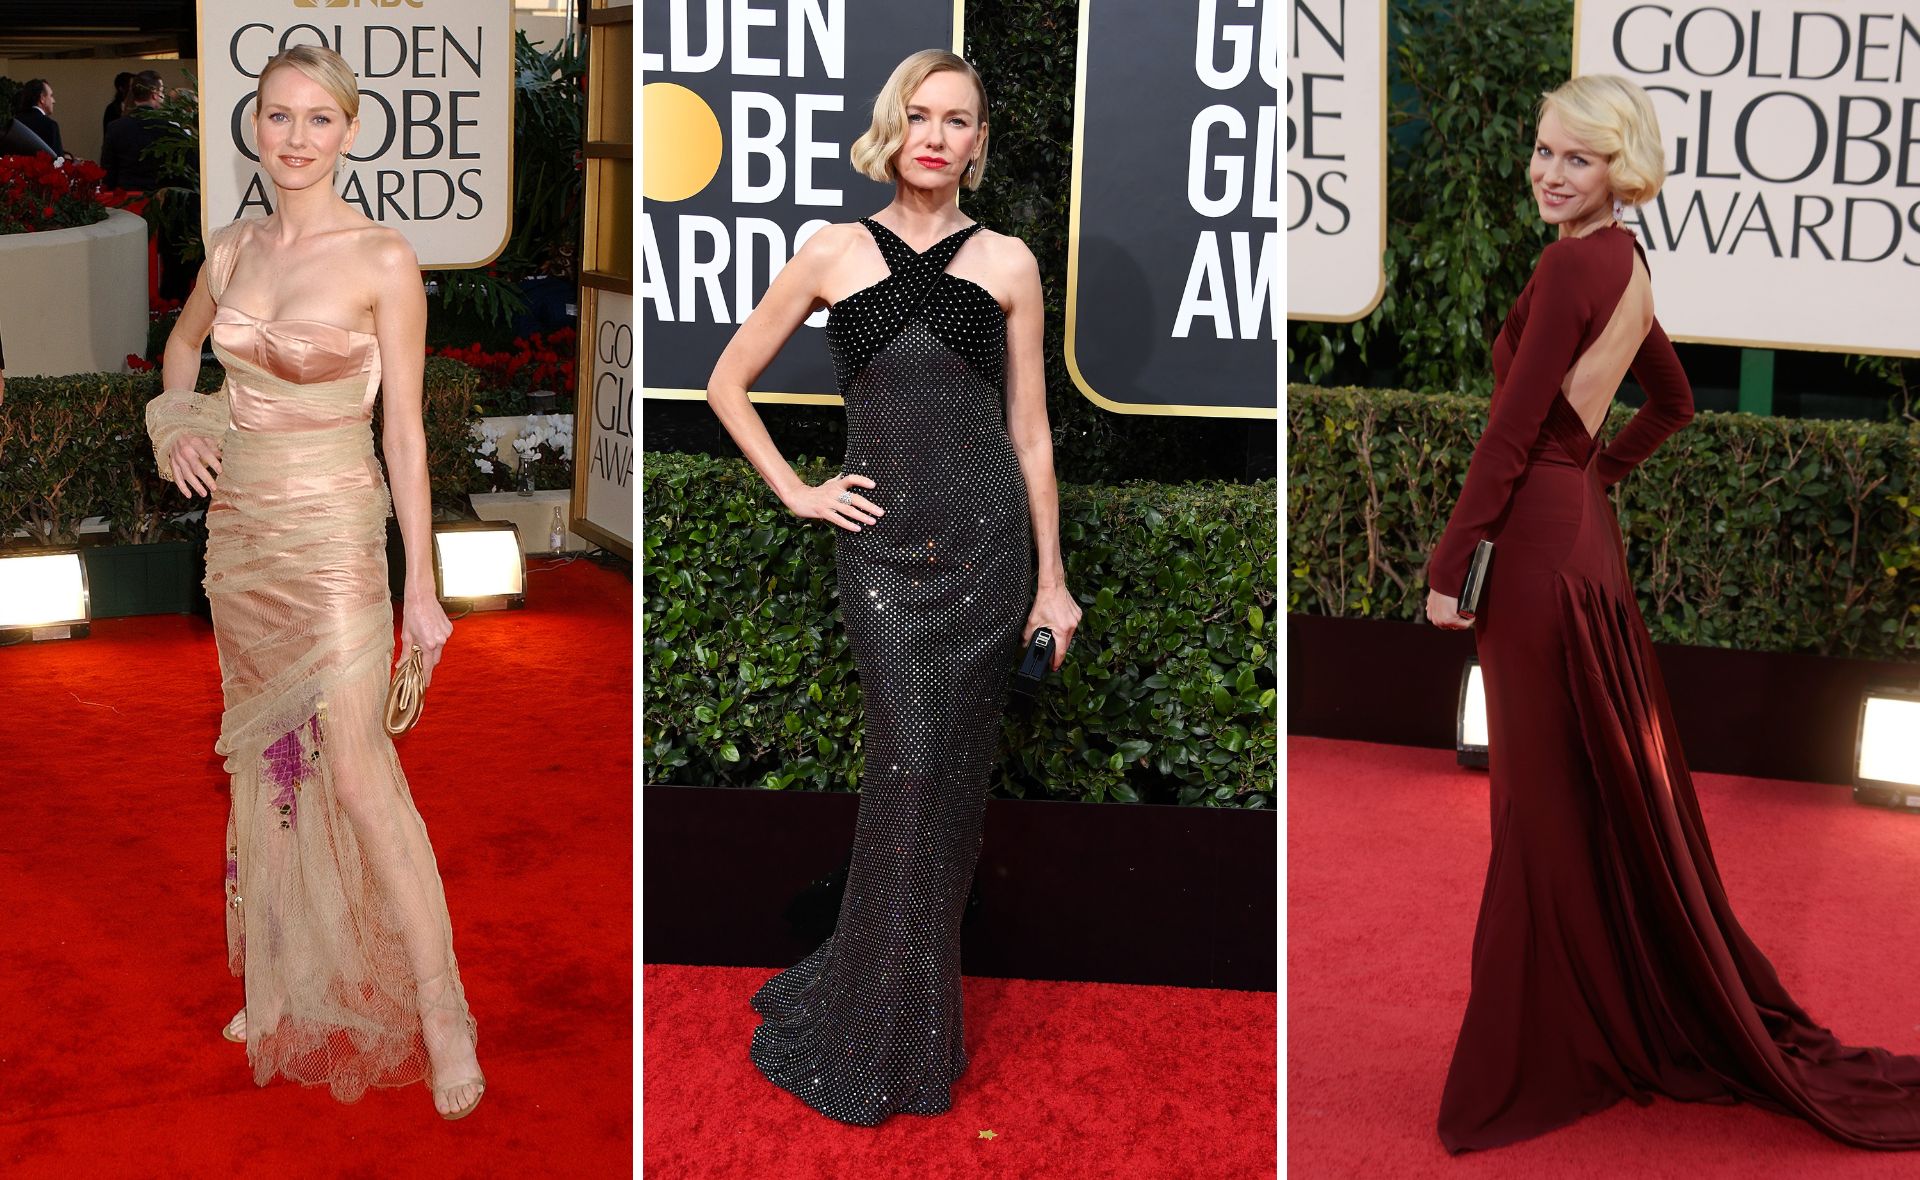 All of Naomi Watts’ best moments and looks at the Golden Globes over the years